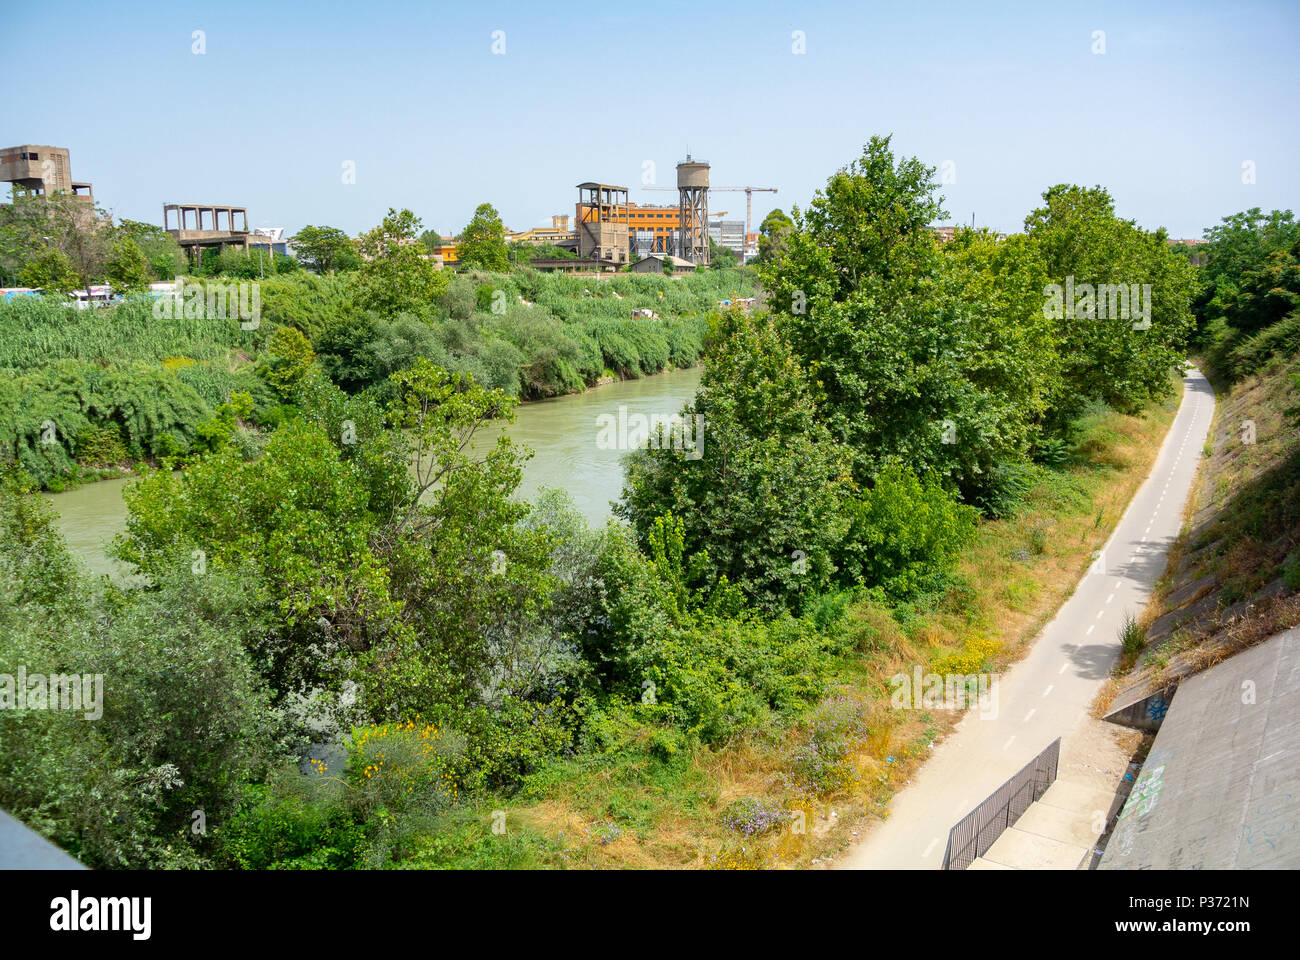 Industrial area by Tiber river, Ostiense, Rome, Italy Stock Photo